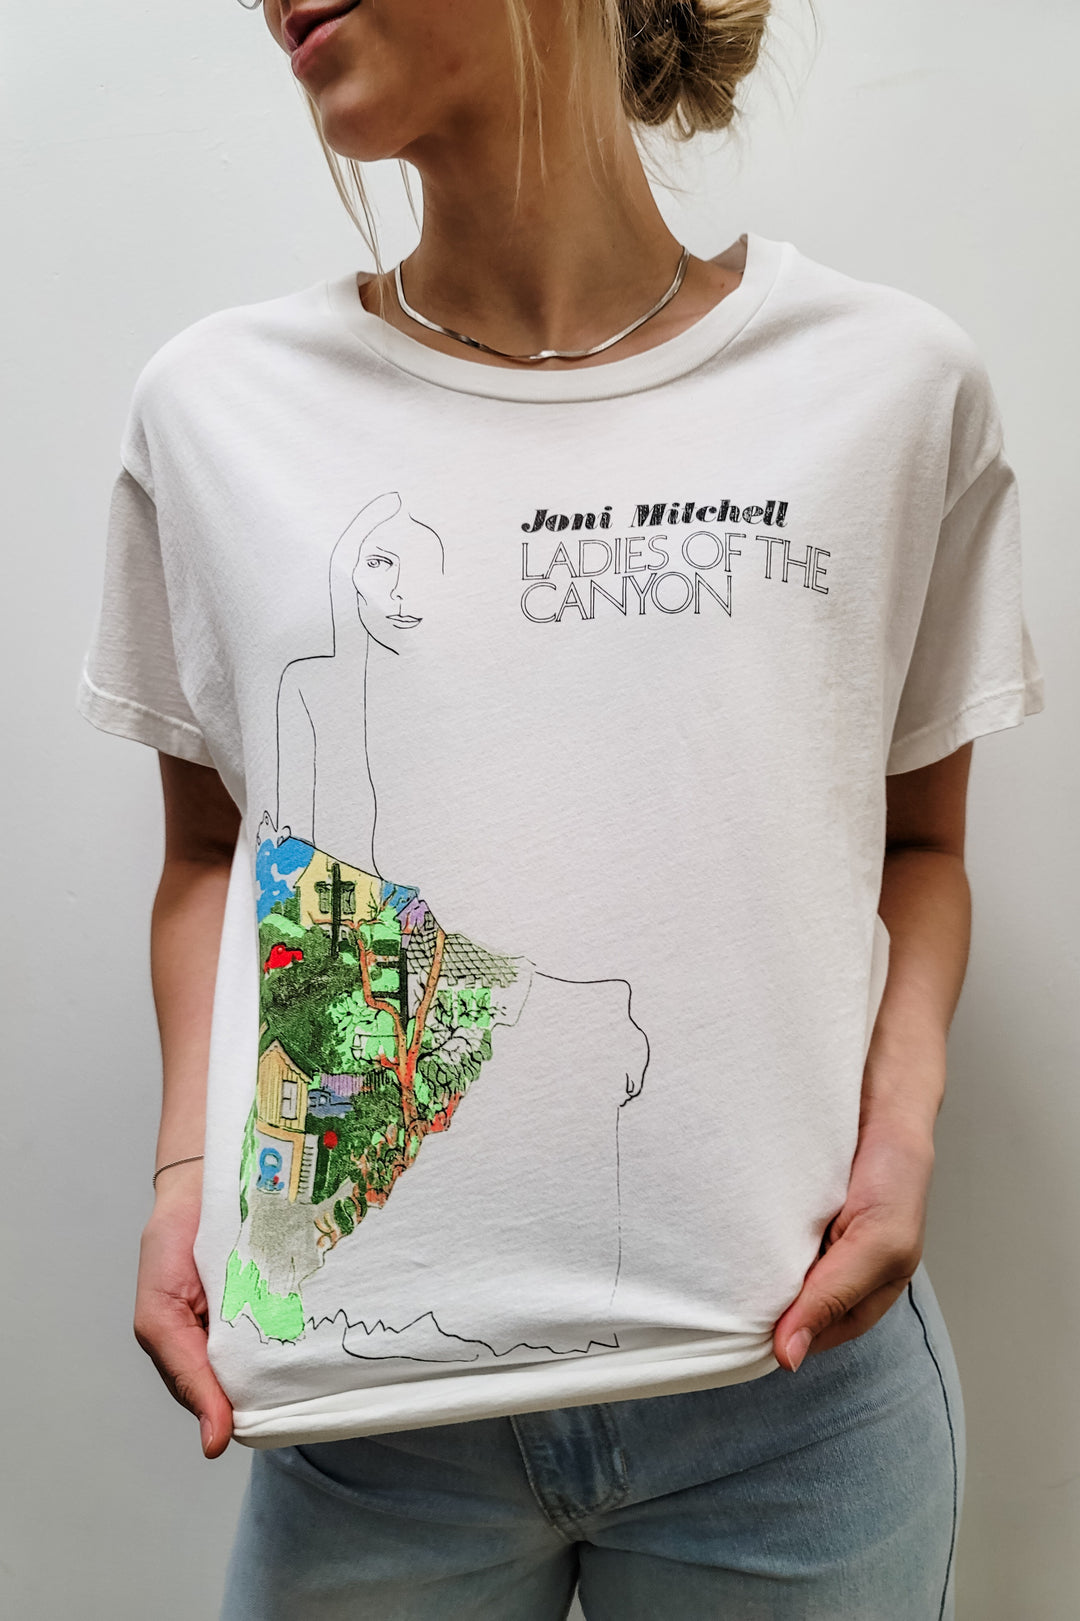 Day Dreamer Joni Mitchell Ladies Of The Canyon White Graphic Tee